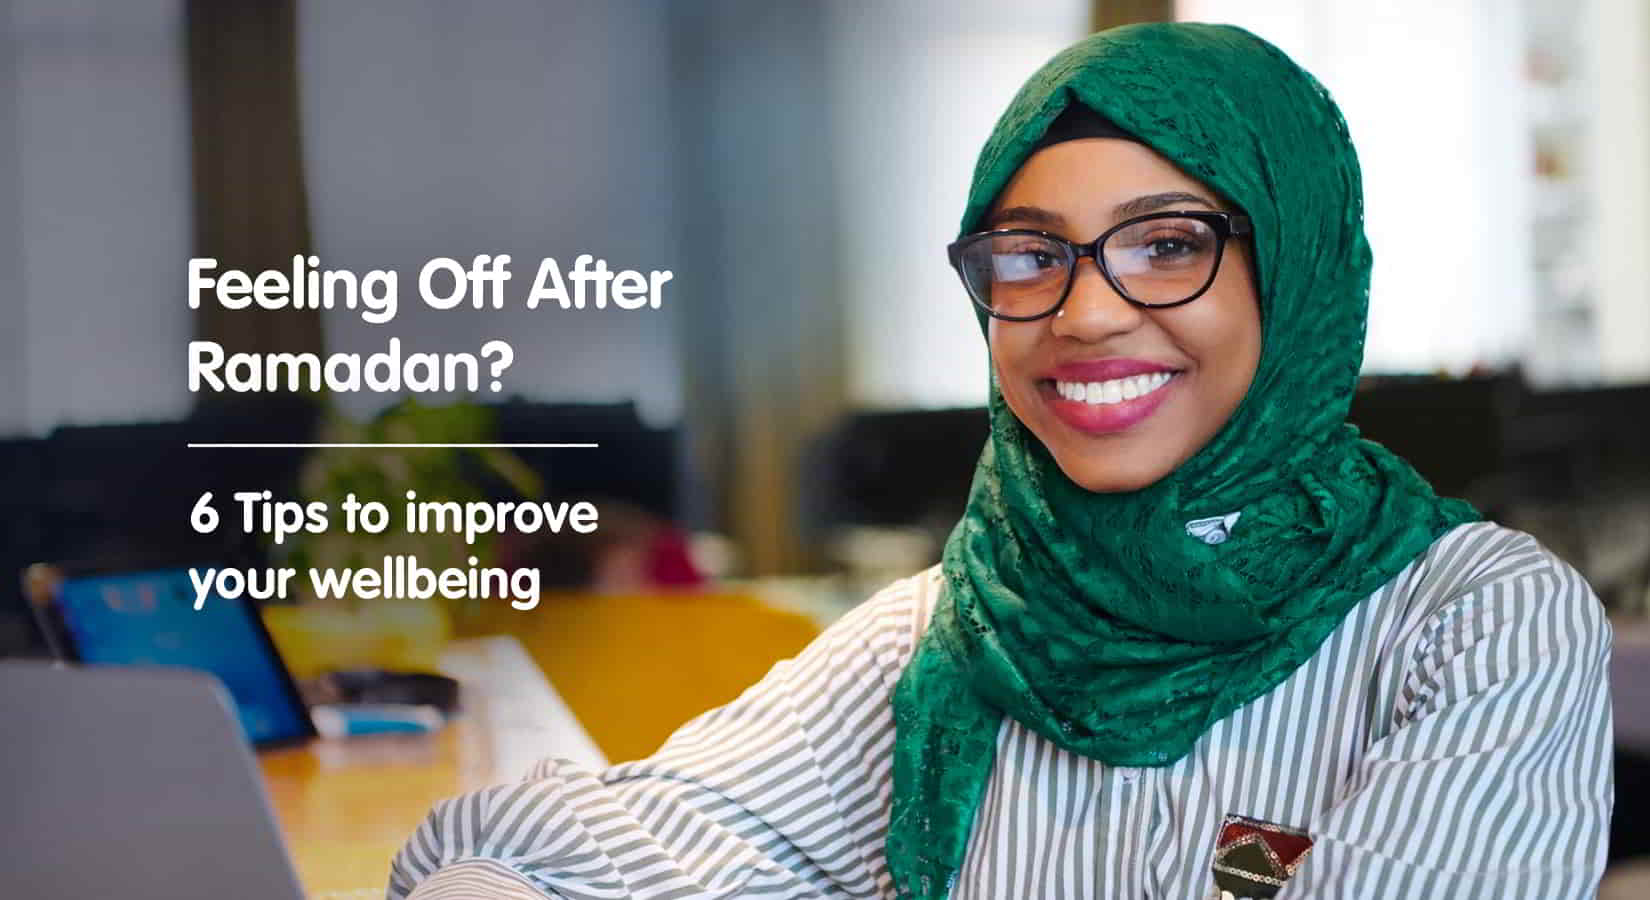 Feeling Off After Ramadan?: 6 Tips to Improve Your Wellbeing